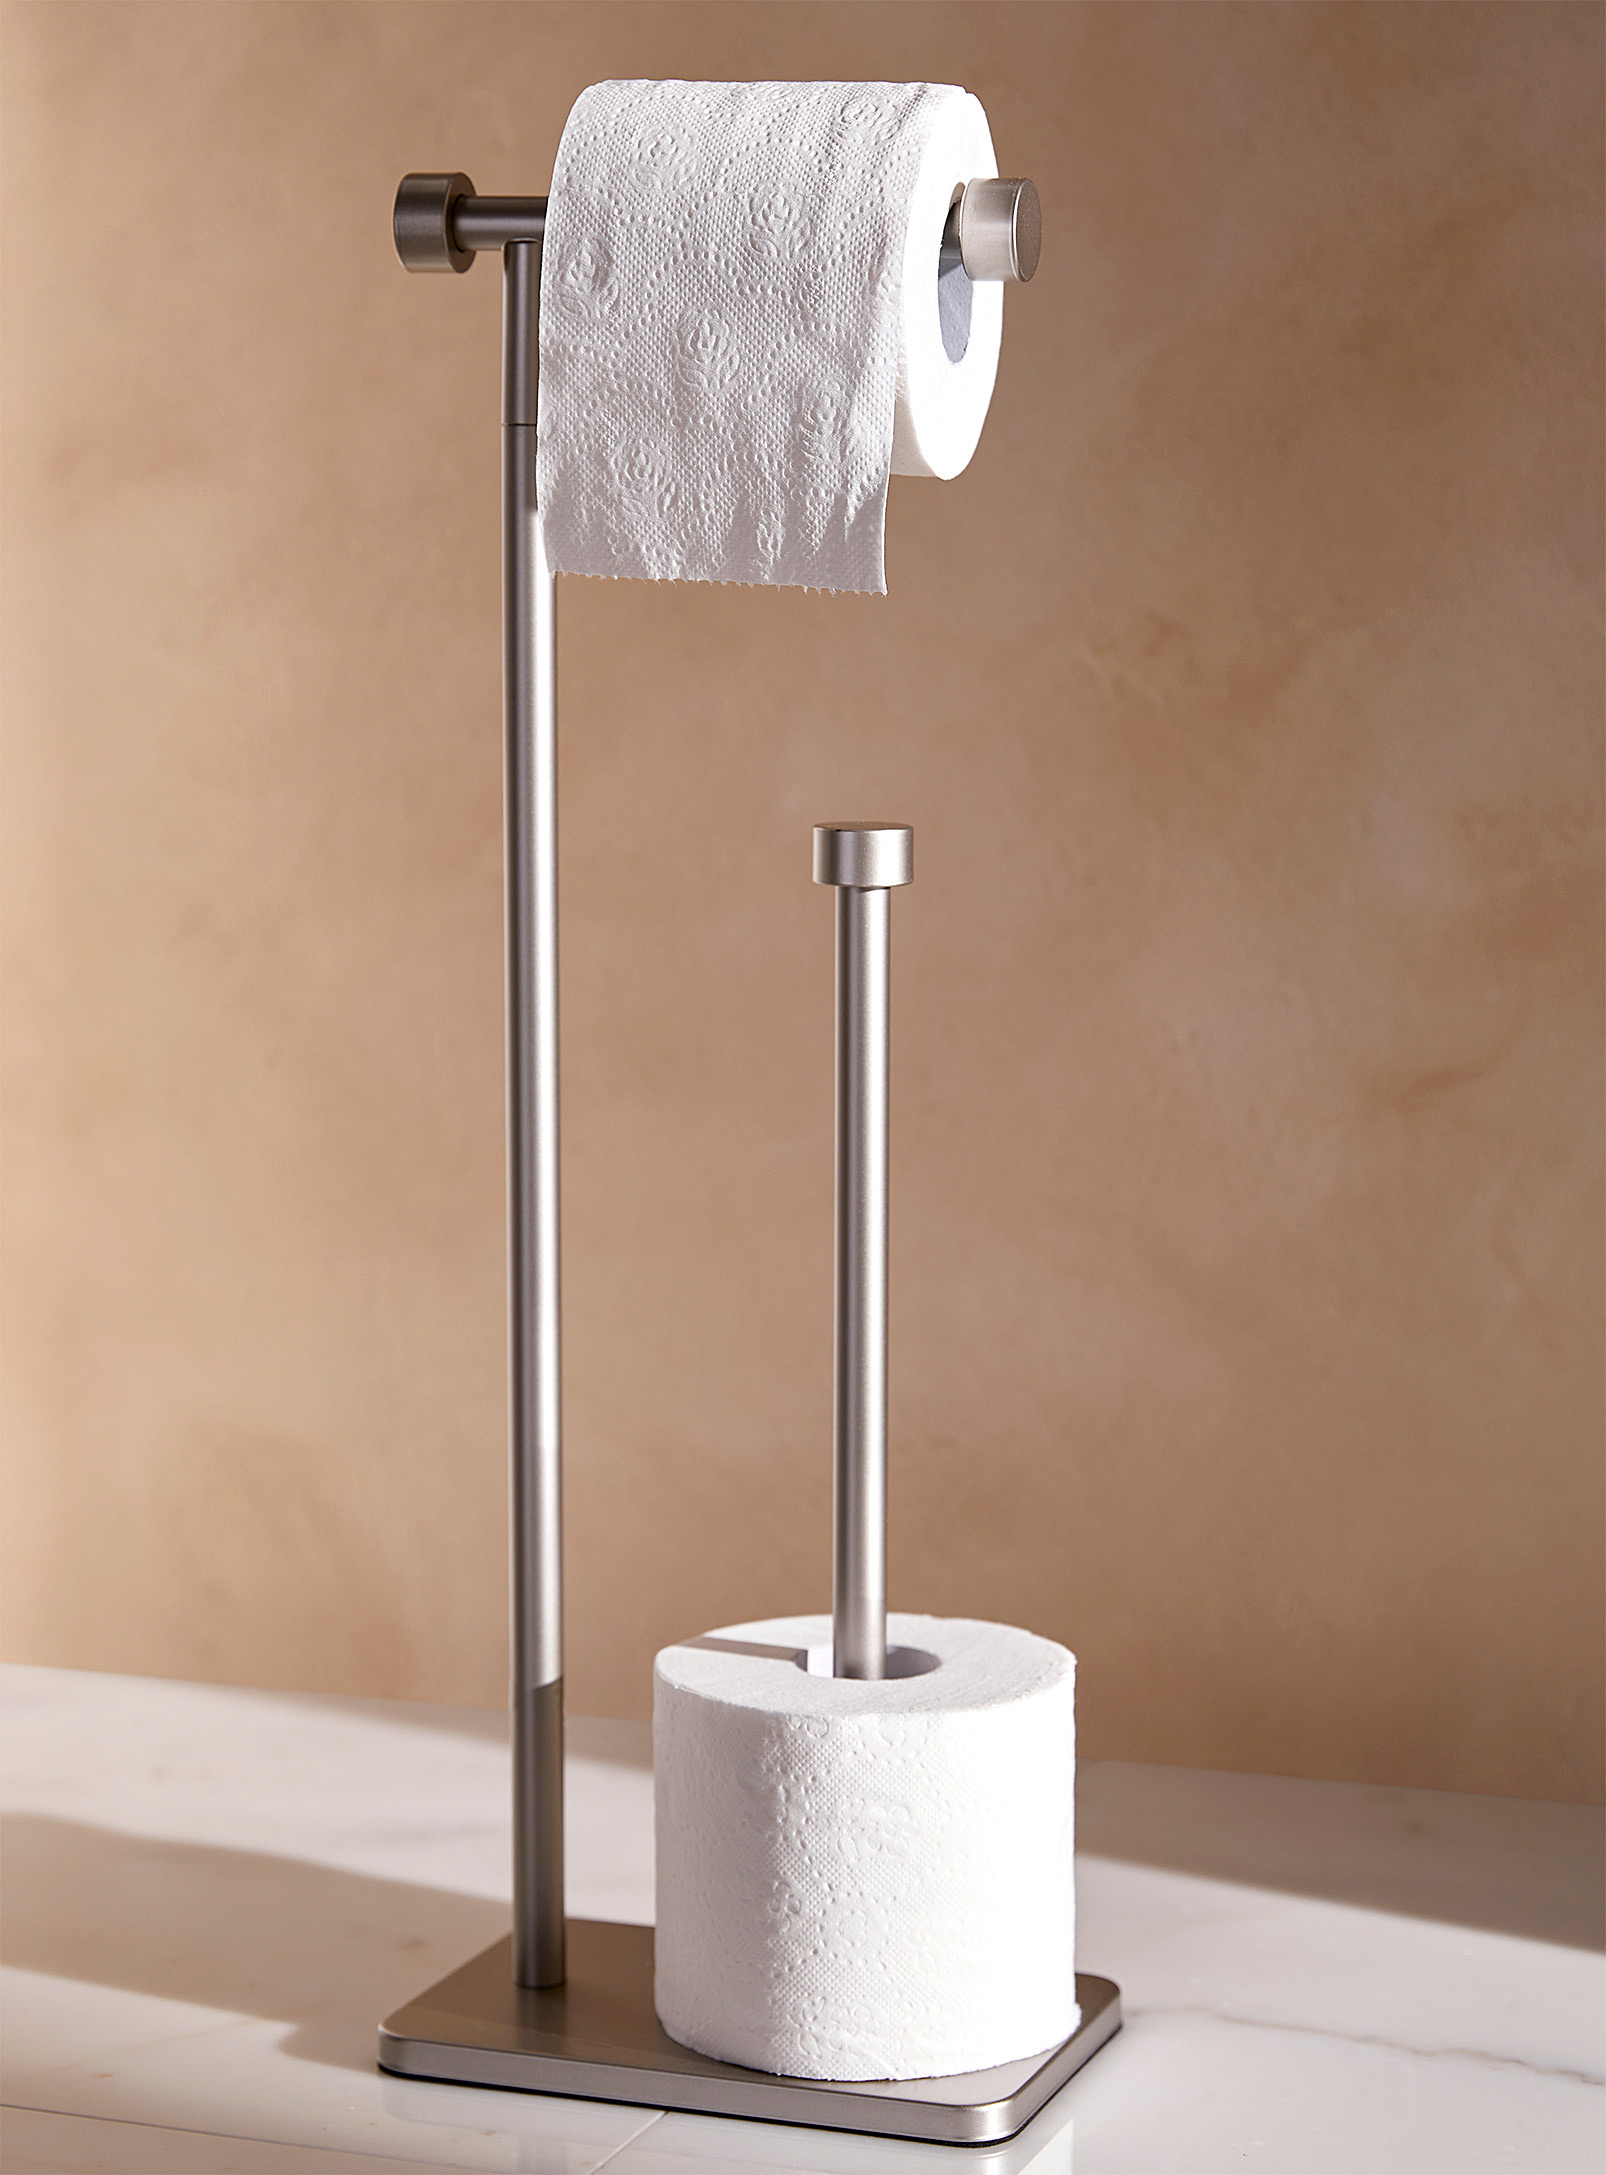 Umbra Silver Toilet Paper Holder With Reserve In Assorted